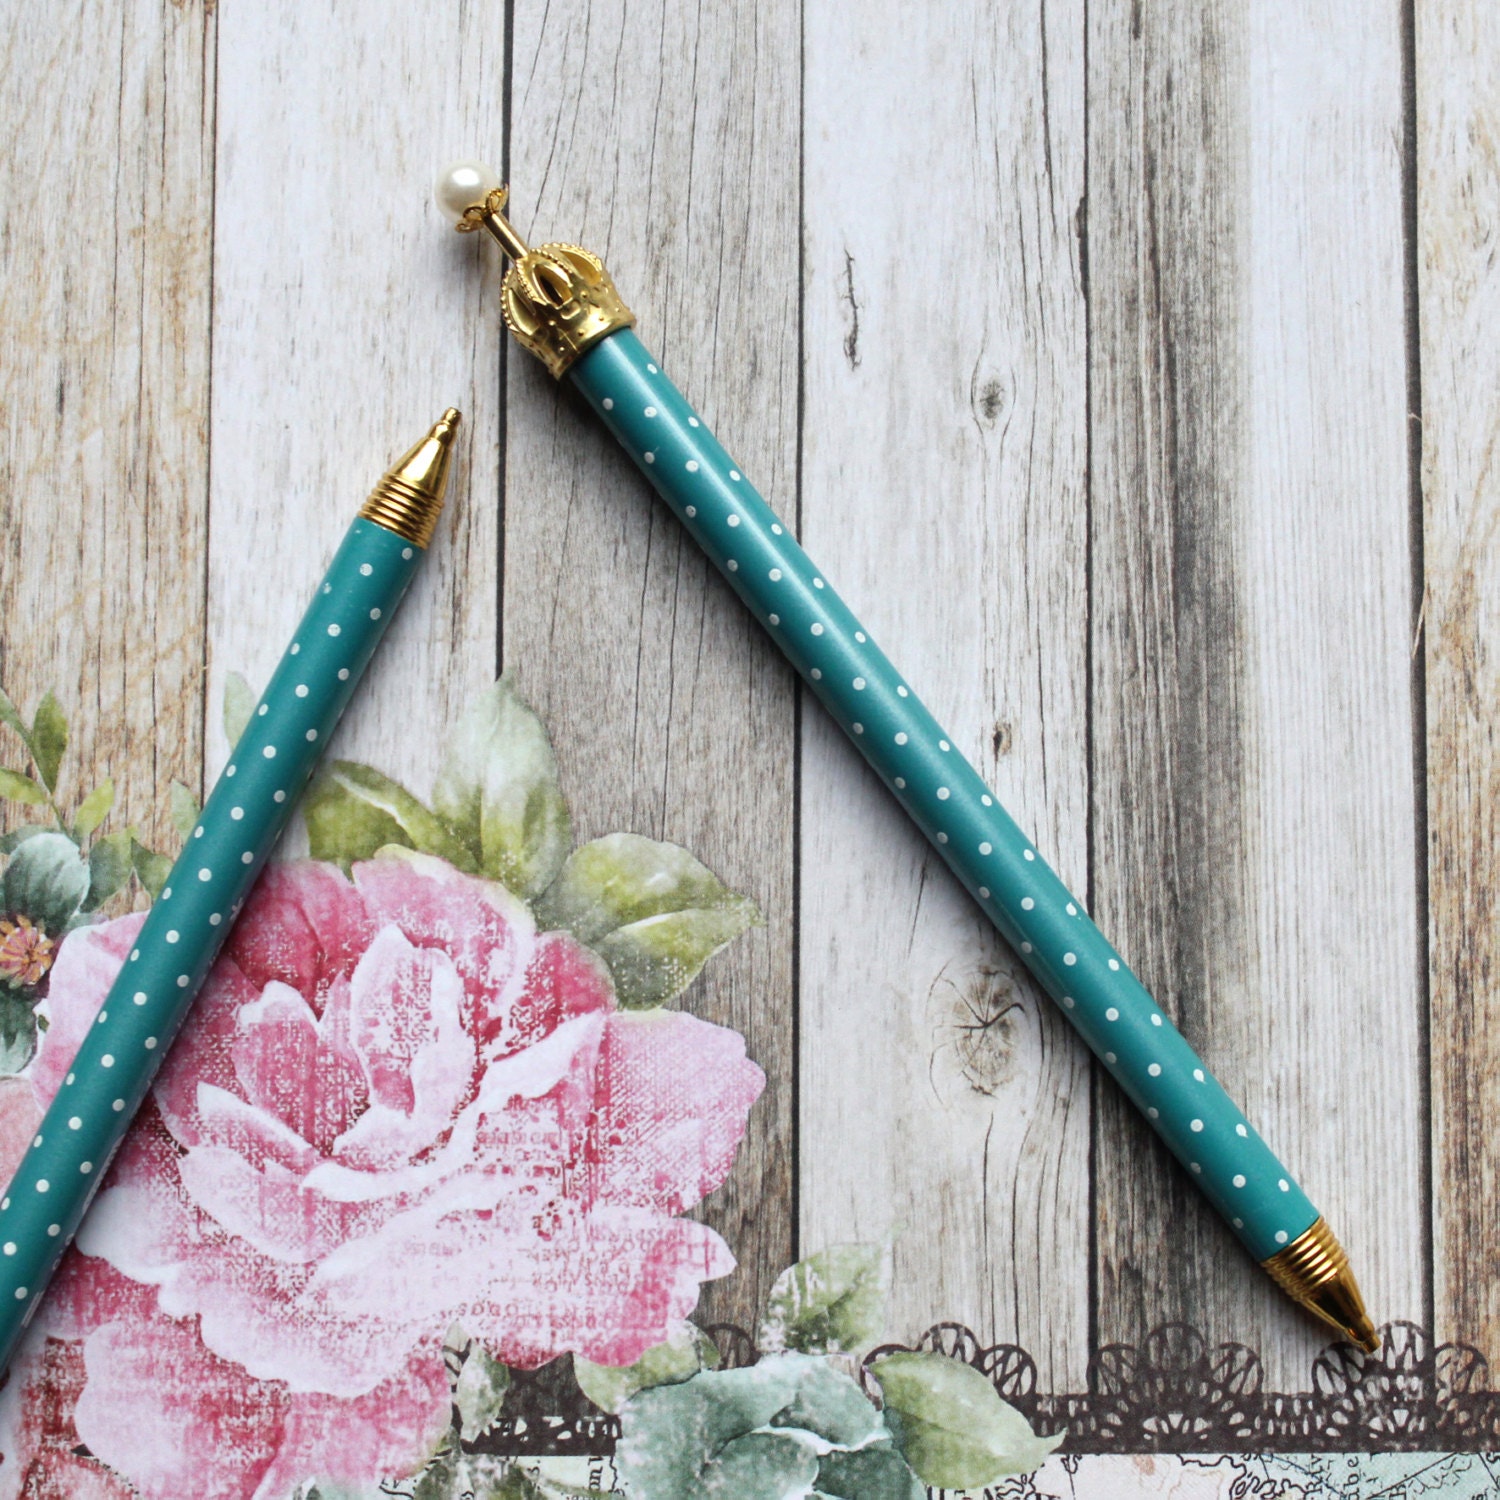 Princess Mechanical Pencil - Teal from ThePensnicketyCo on Etsy Studio